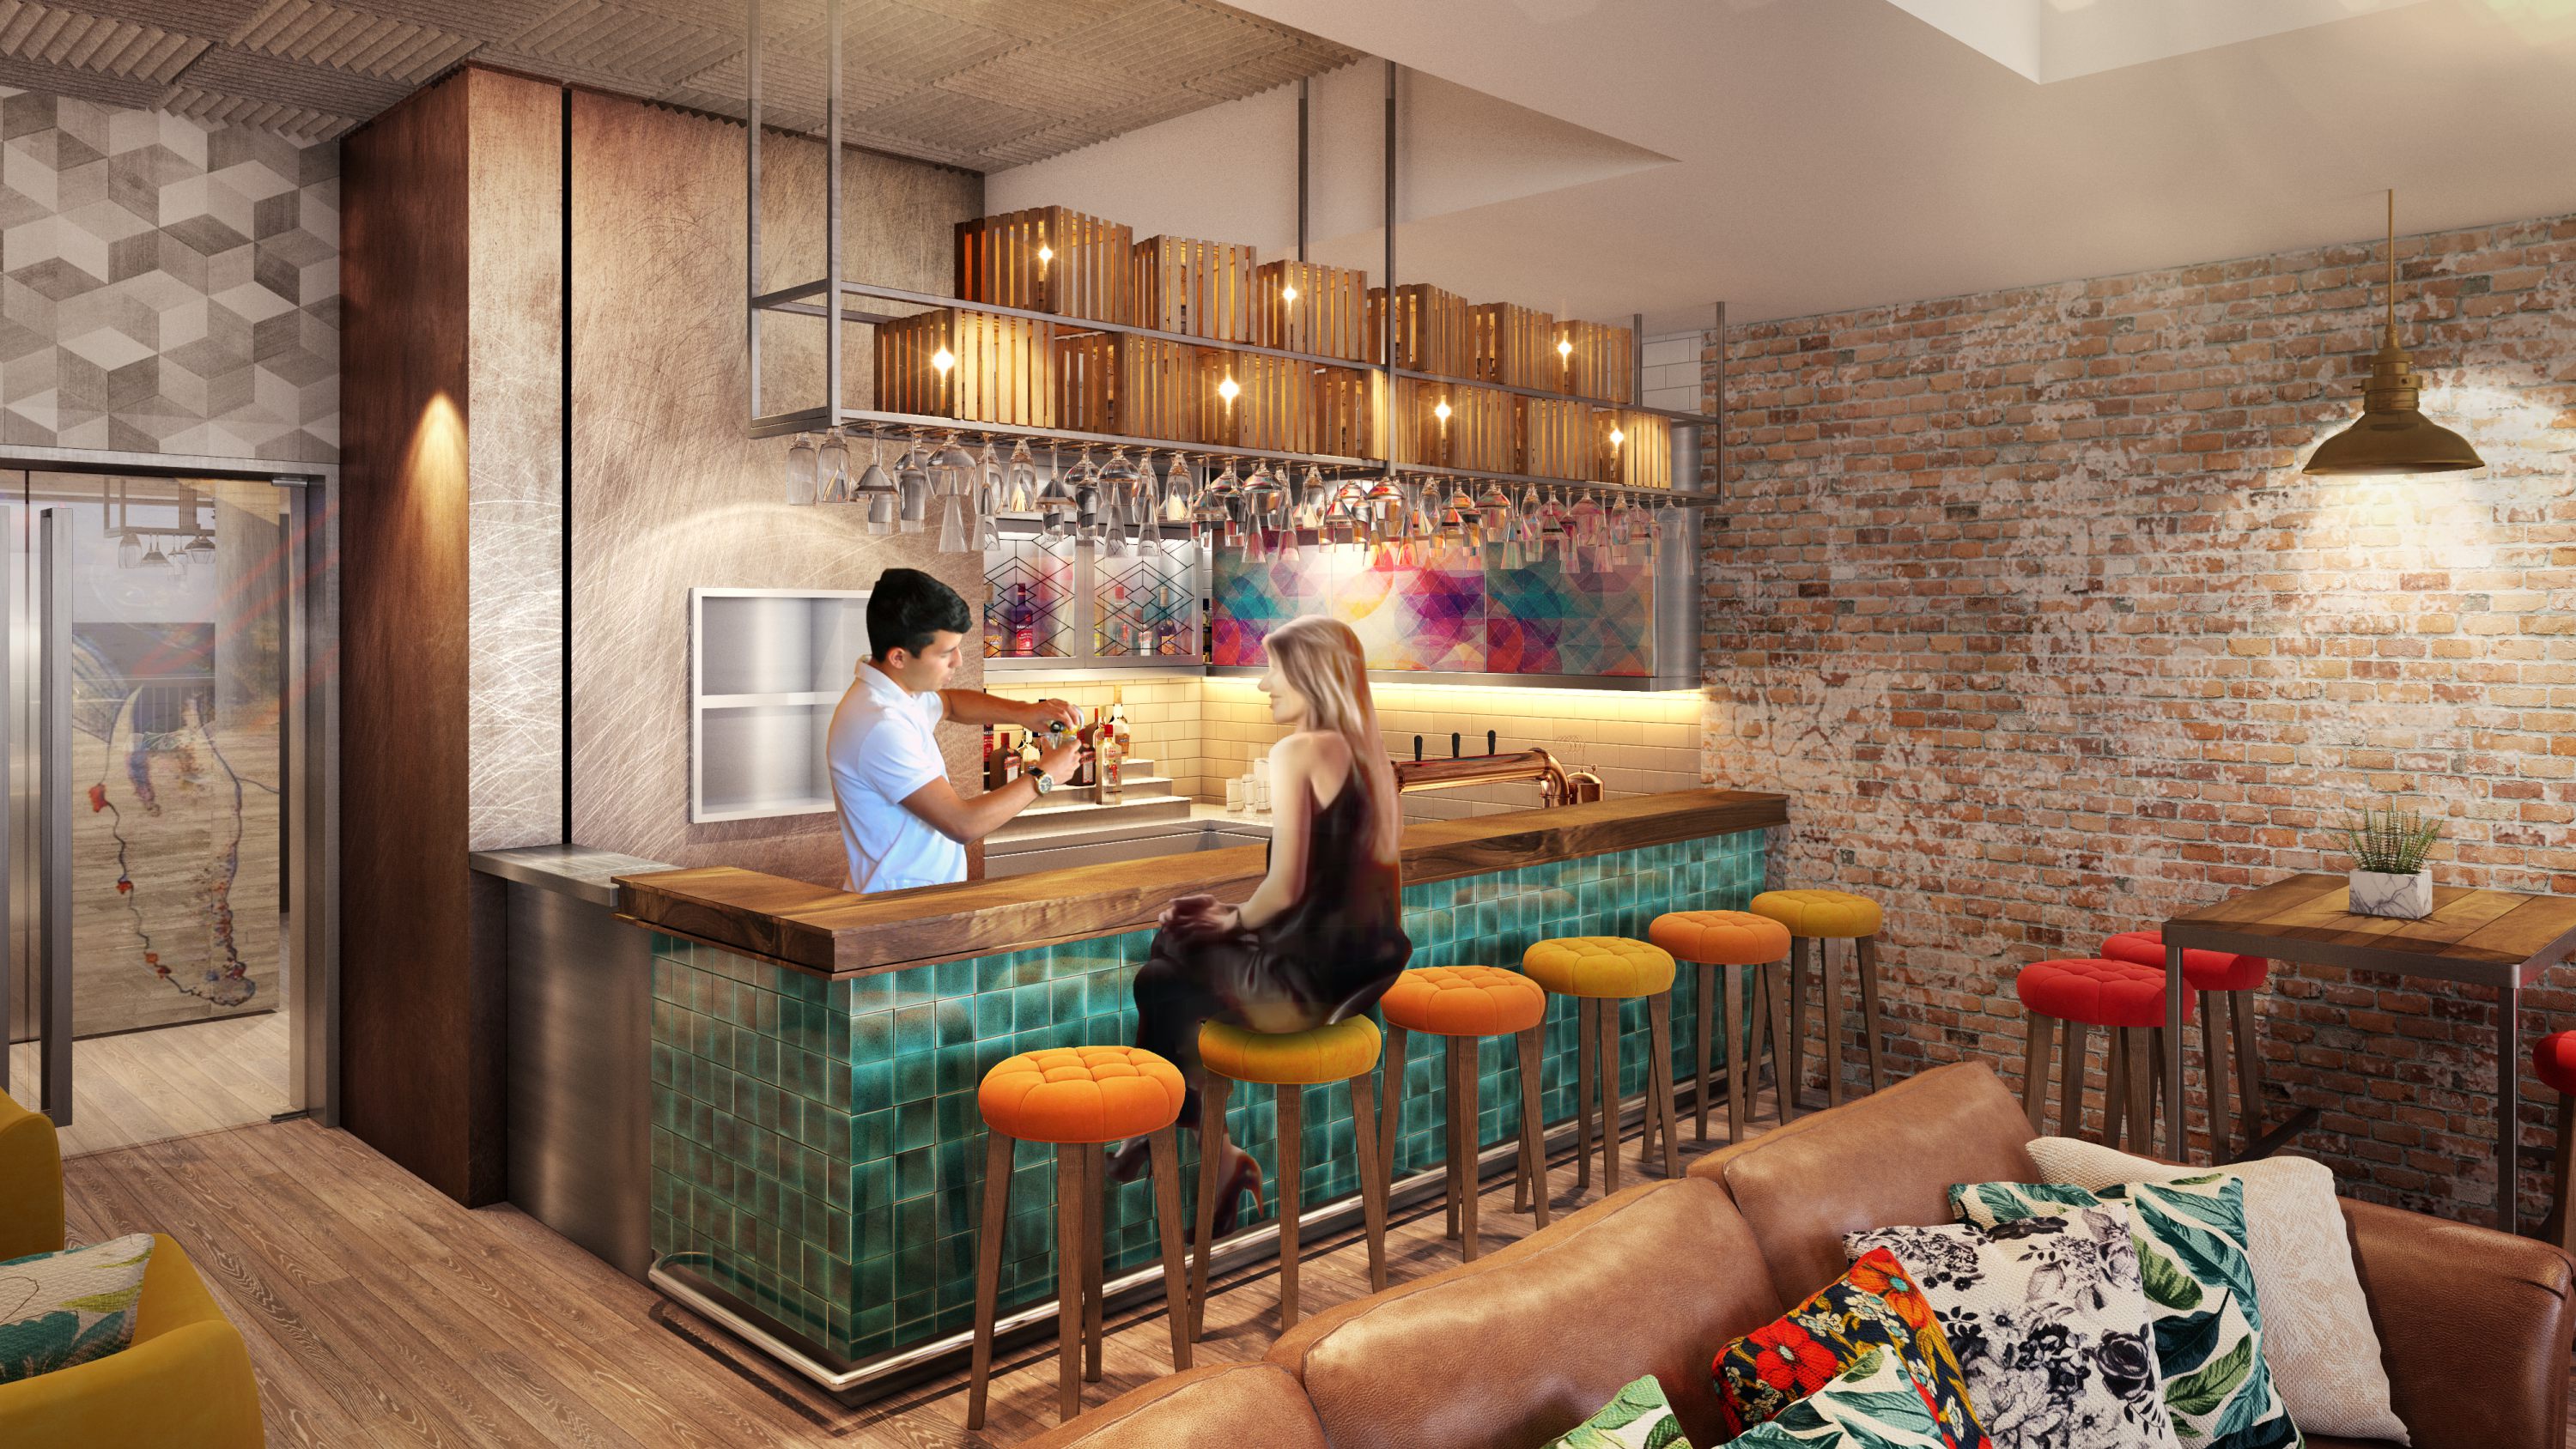 Ovolo’s Mojo Nomad brings vibrant ‘micro-living’ concept to Queen’s Road Central